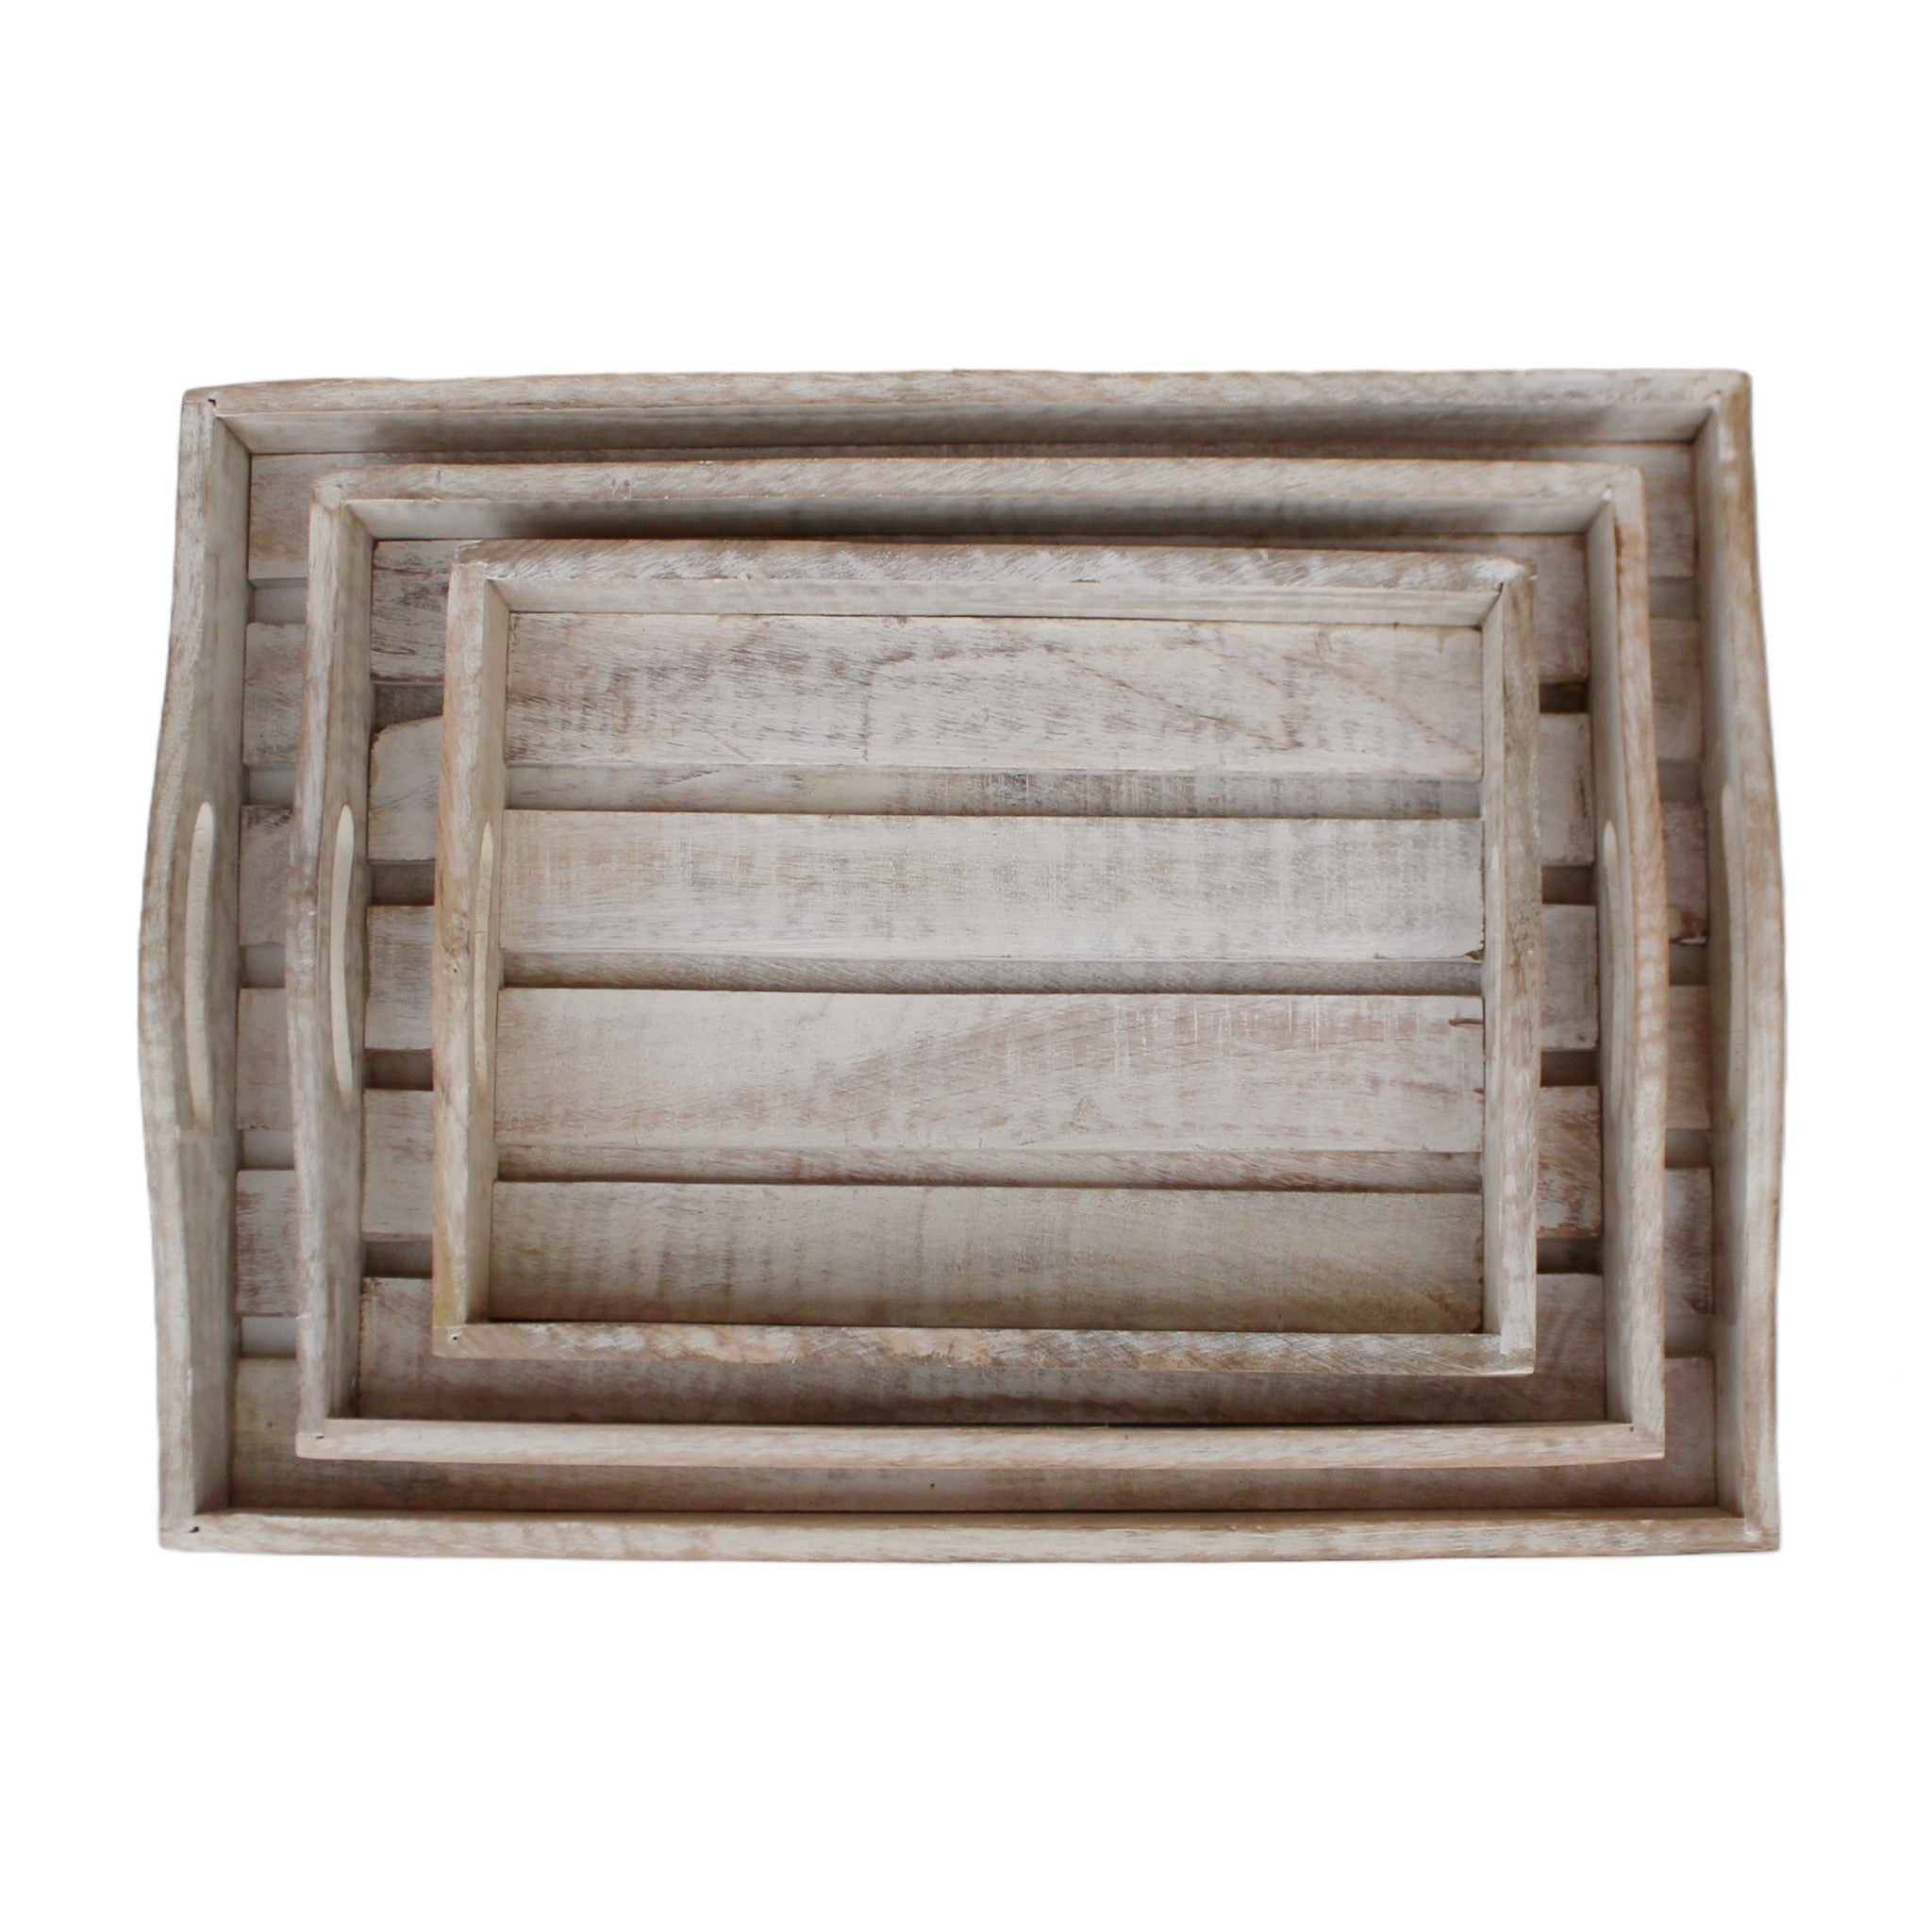 Barn Wood Serving Trays in White, Set of 3